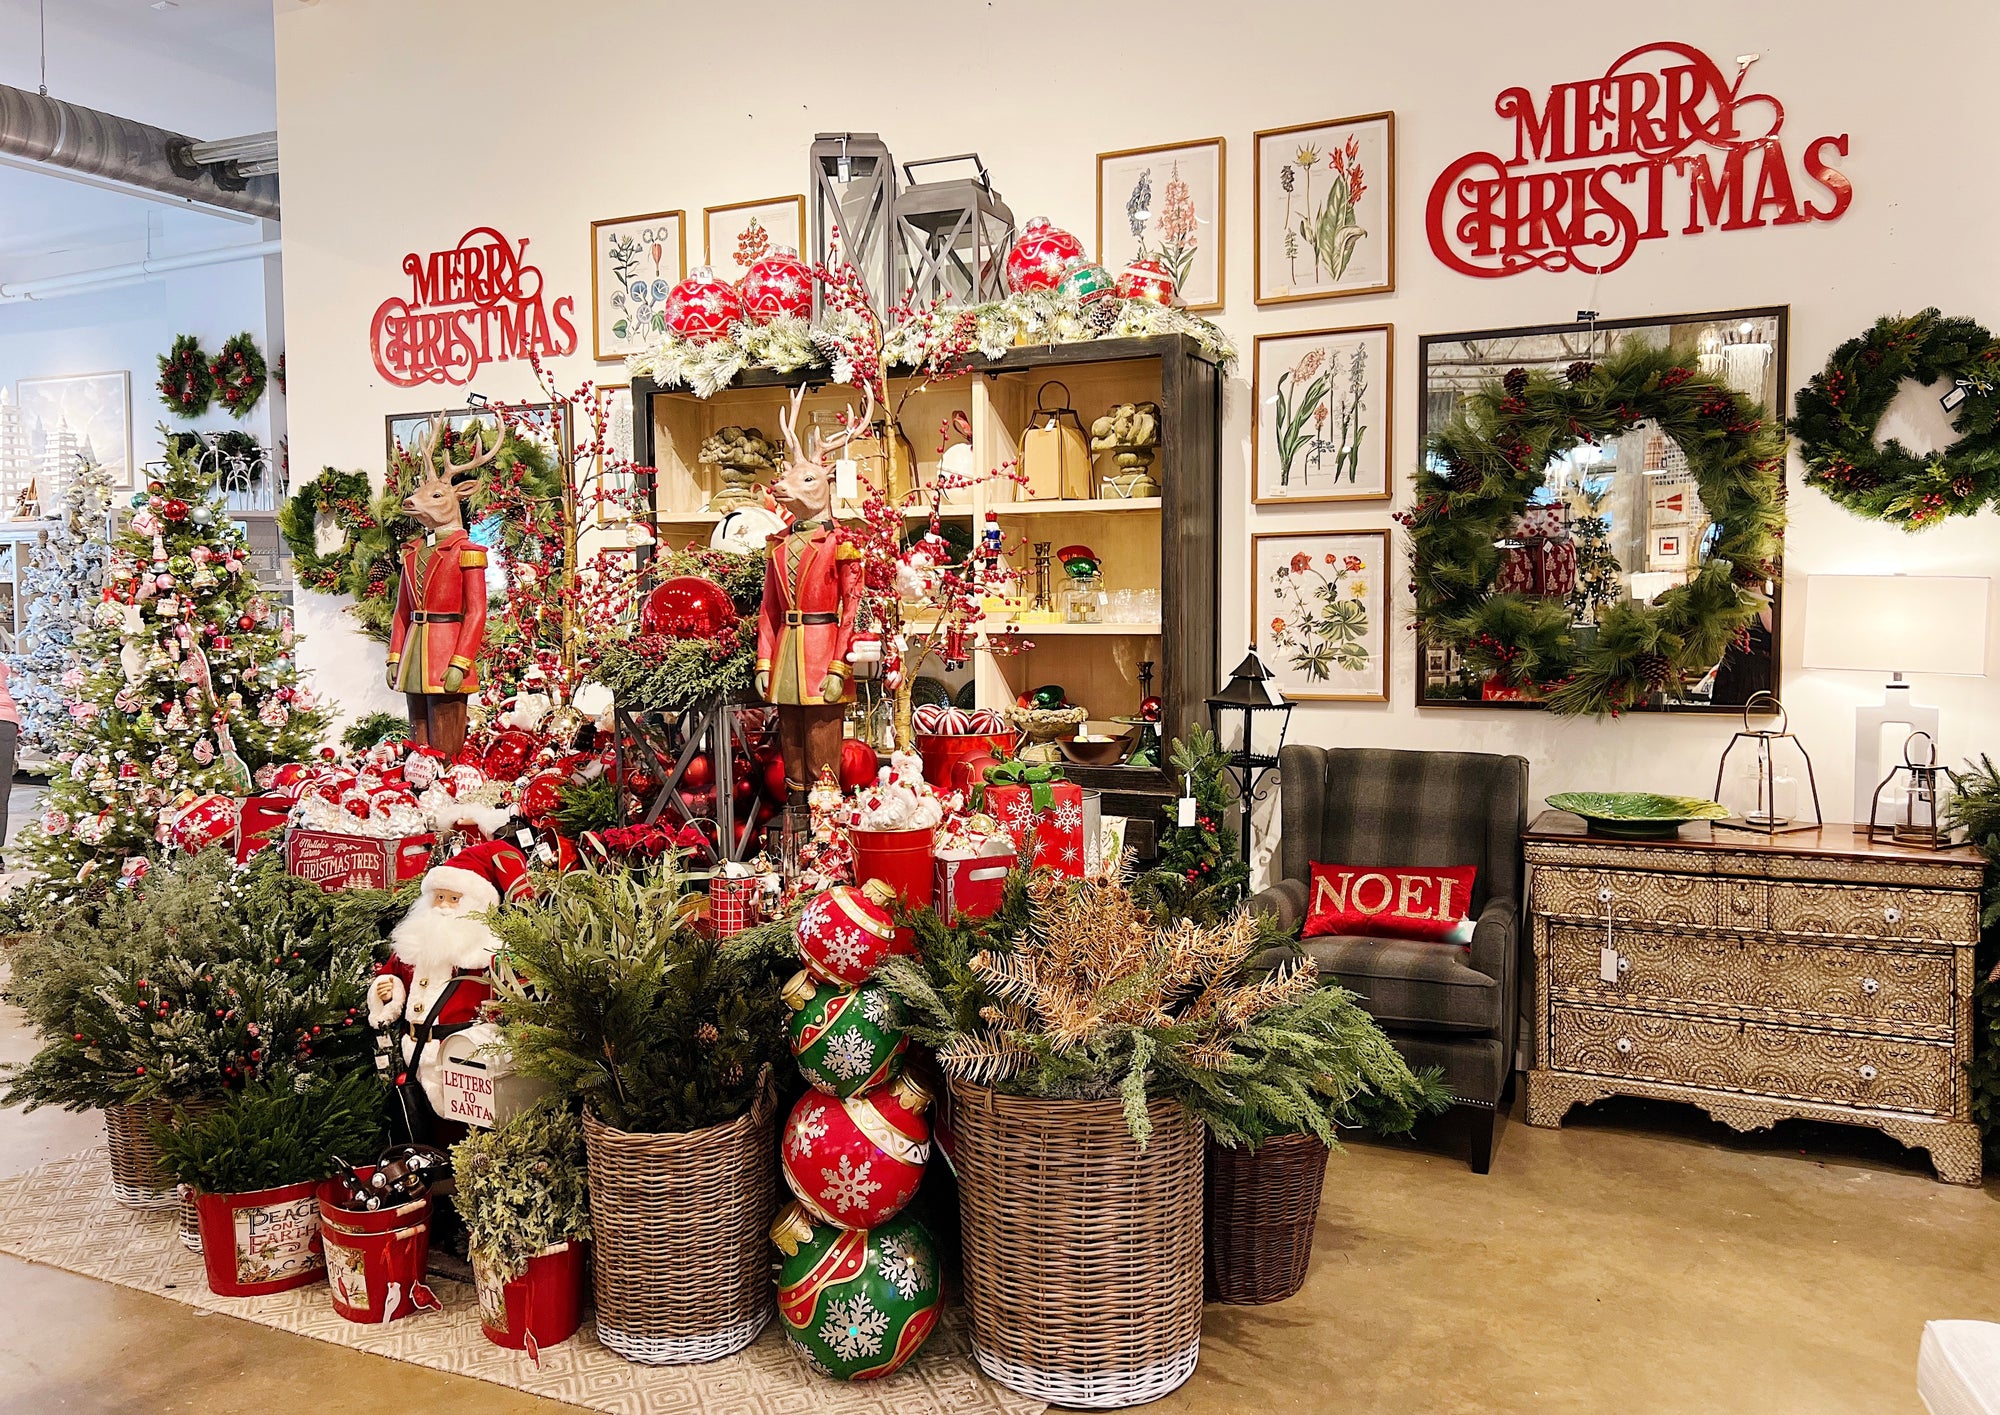 BOUNTIFUL HOLIDAY: Events, Store Sneak Peeks And More!